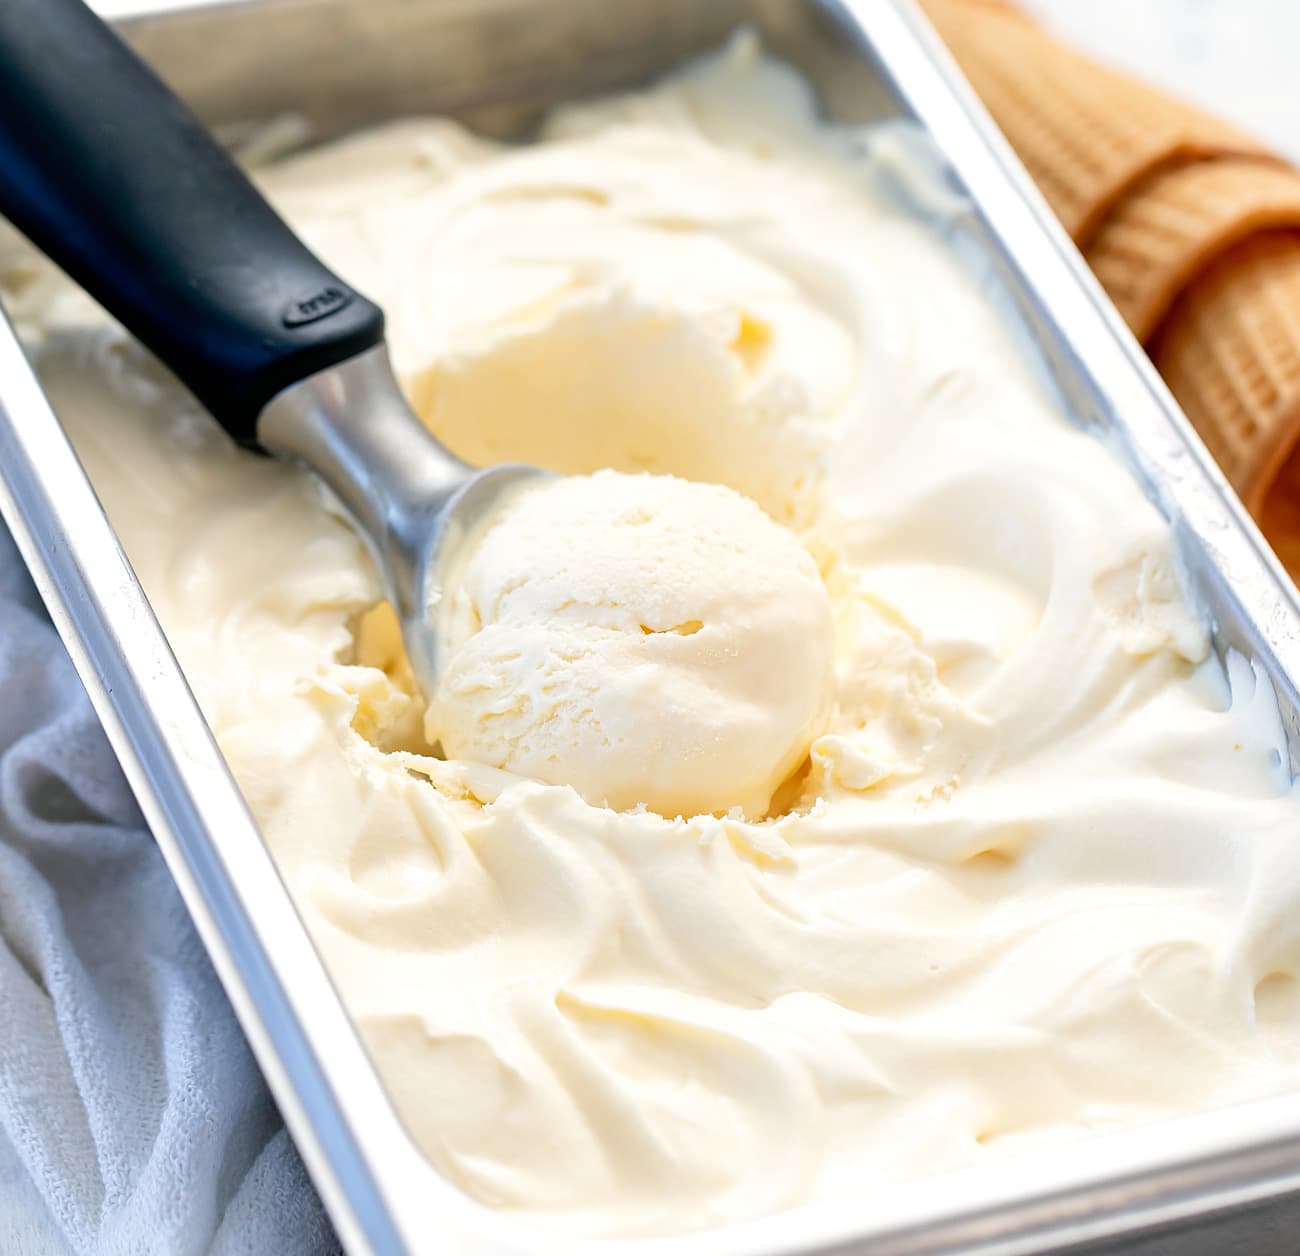 How To Make Vanilla Ice Cream Without Ice Cream Maker And Whipping Cream